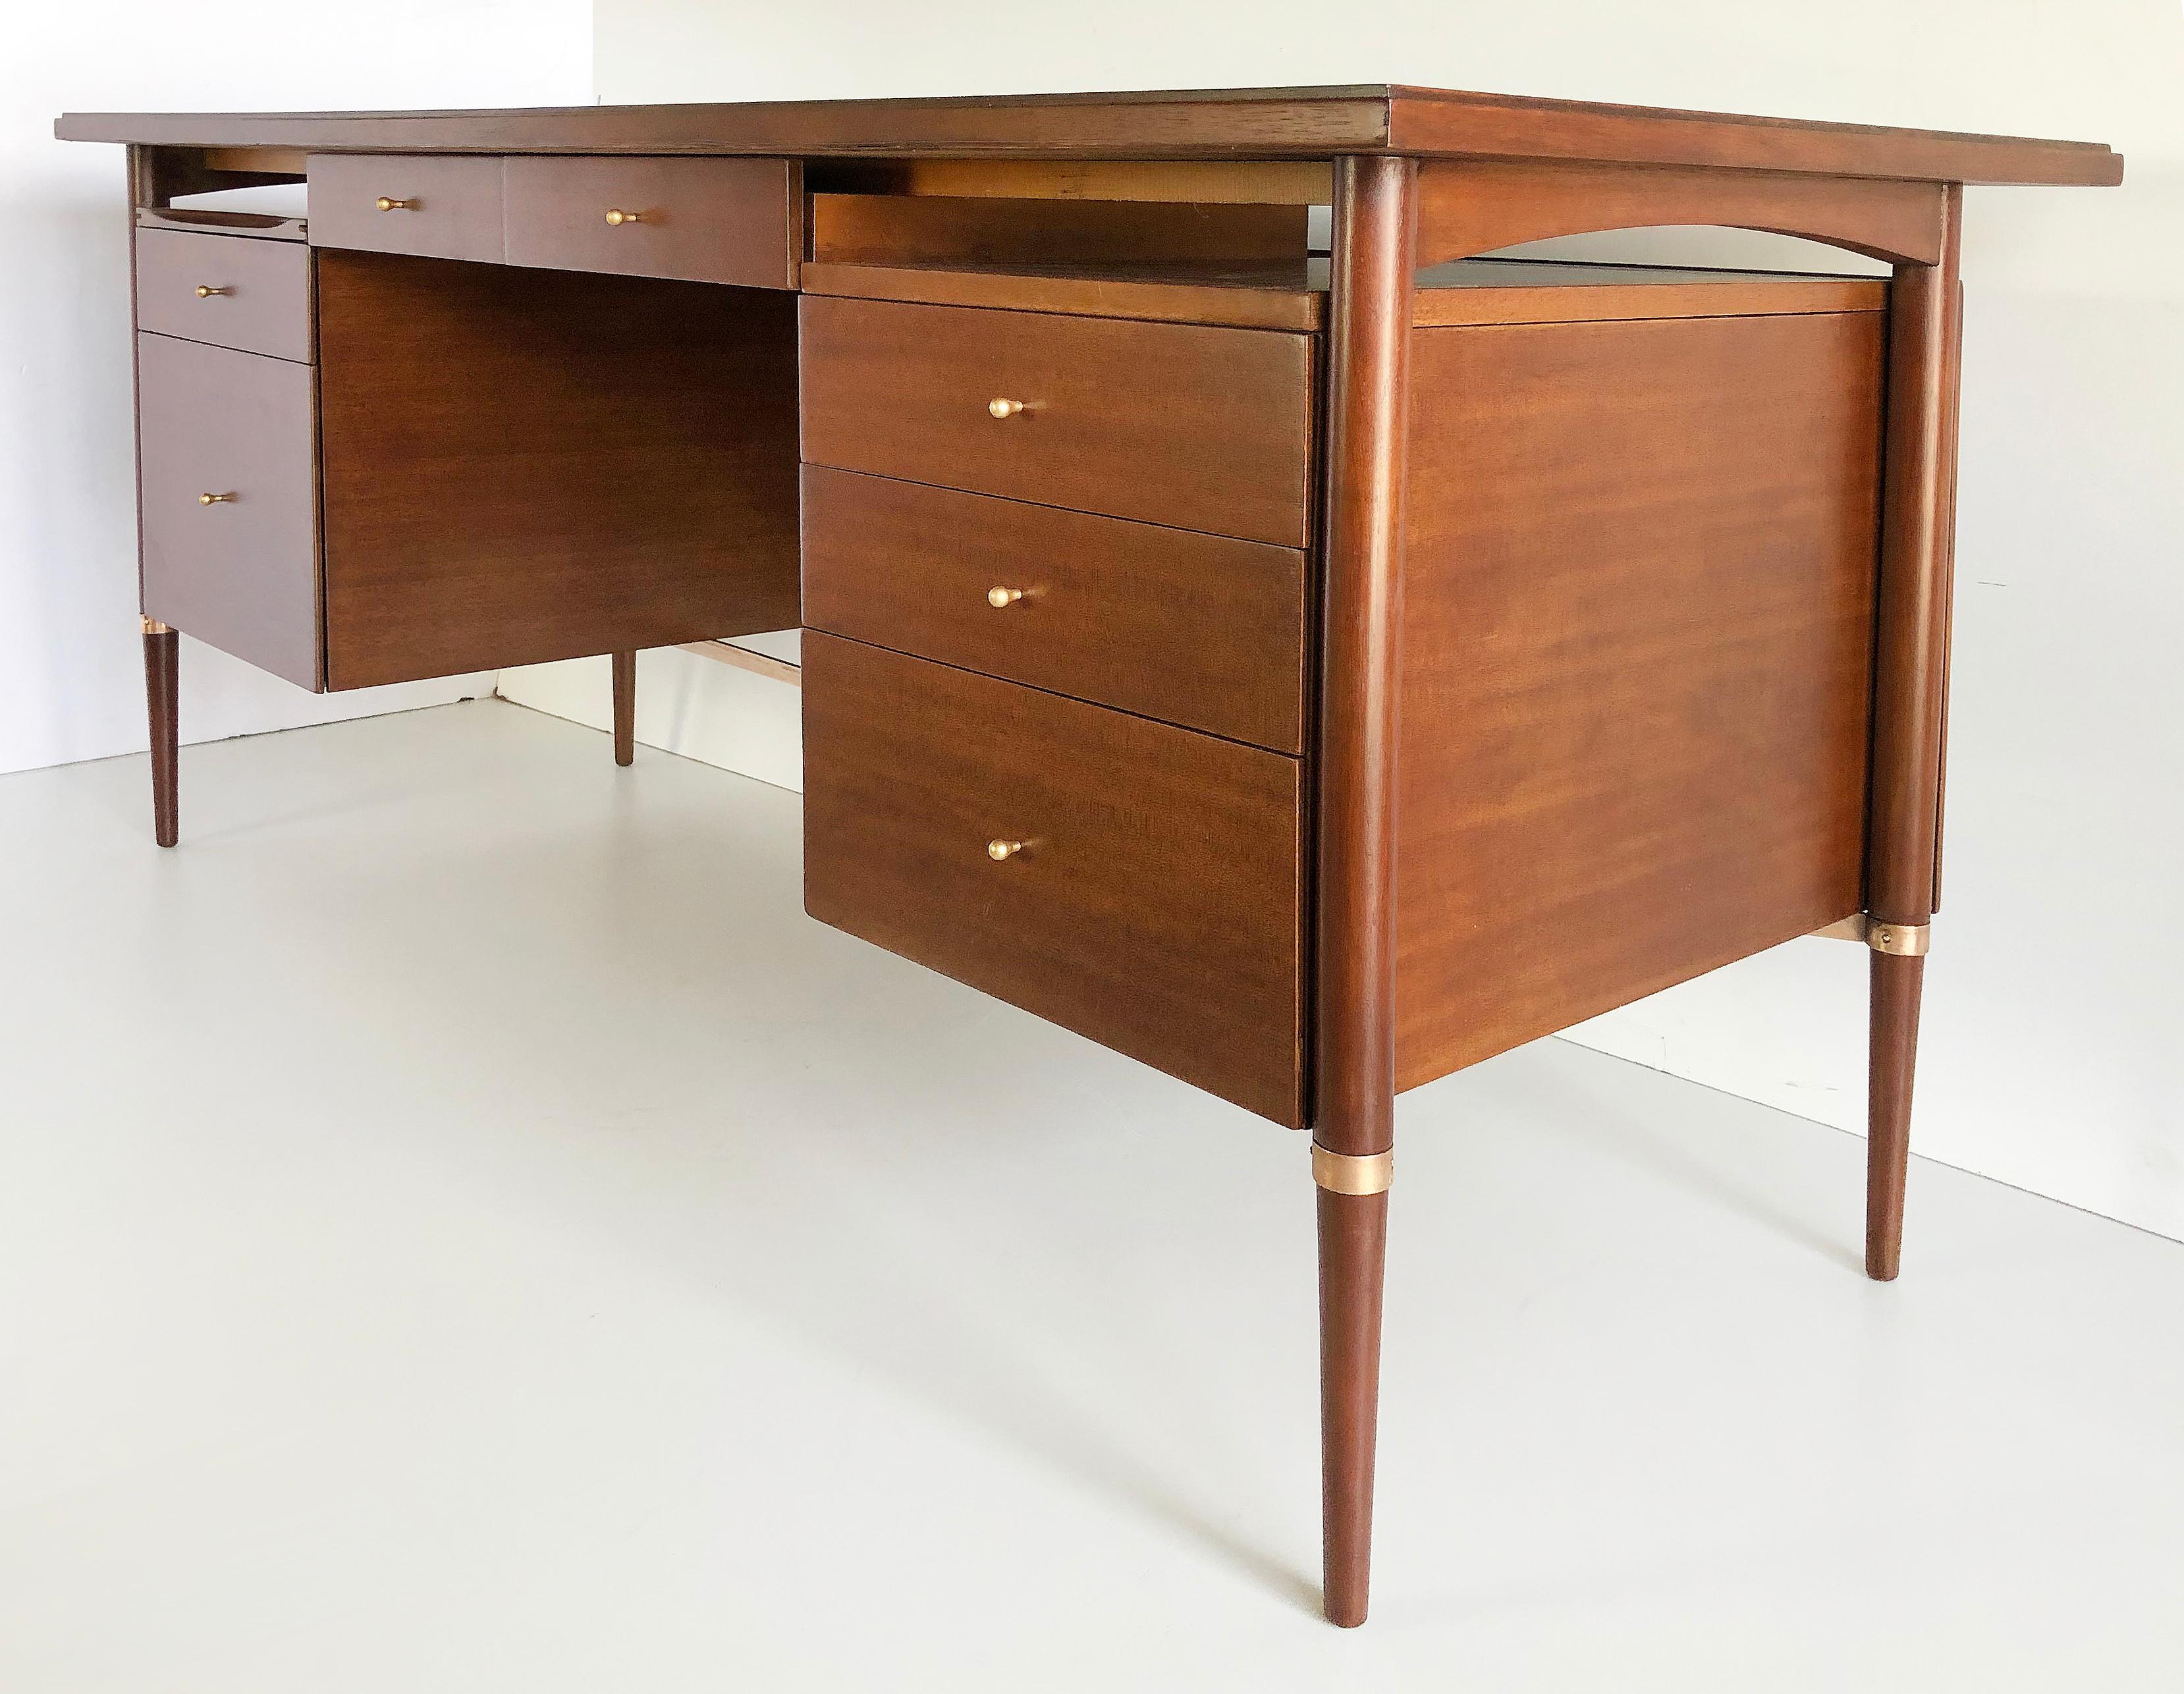 Paul McCobb Mid-Century Connoisseur Executive Desk in Mahogany 

Offered for sale is a rare Mid-Century Modern mahogany Connoisseur Line desk by Paul McCobb. The desk has a floating effect with brass handles and a brass stretcher. The desk has been